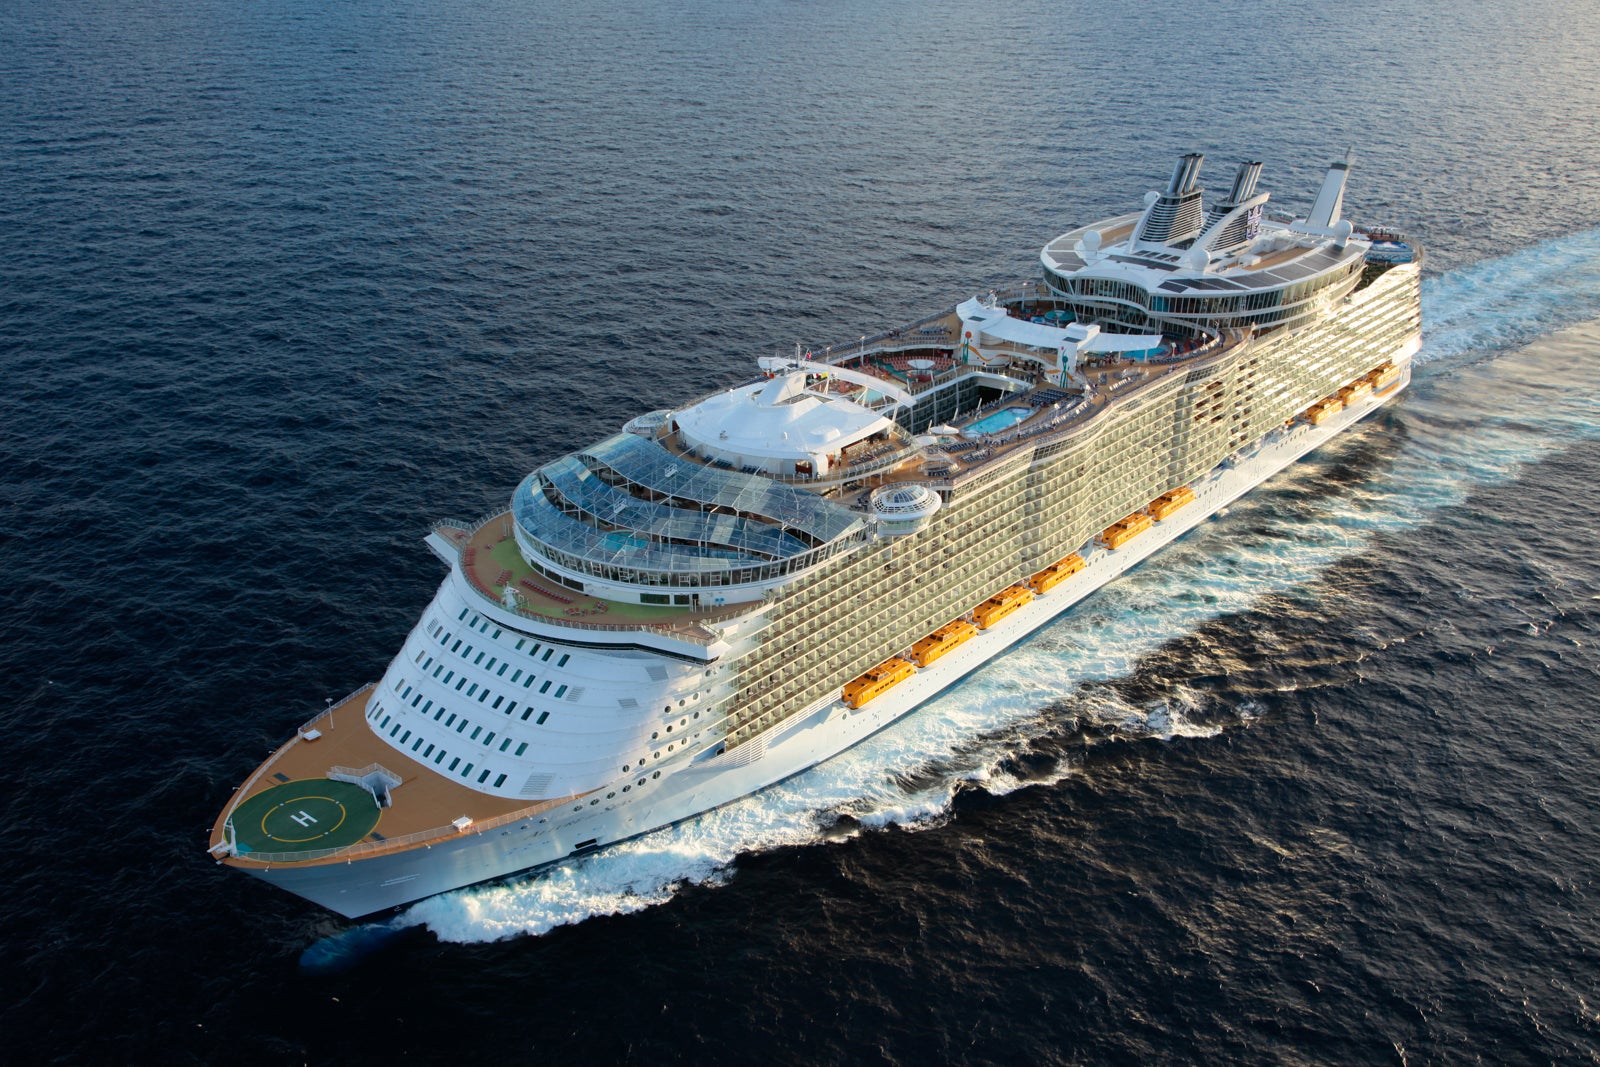 Texas is finally home to one of the world's biggest cruise ships